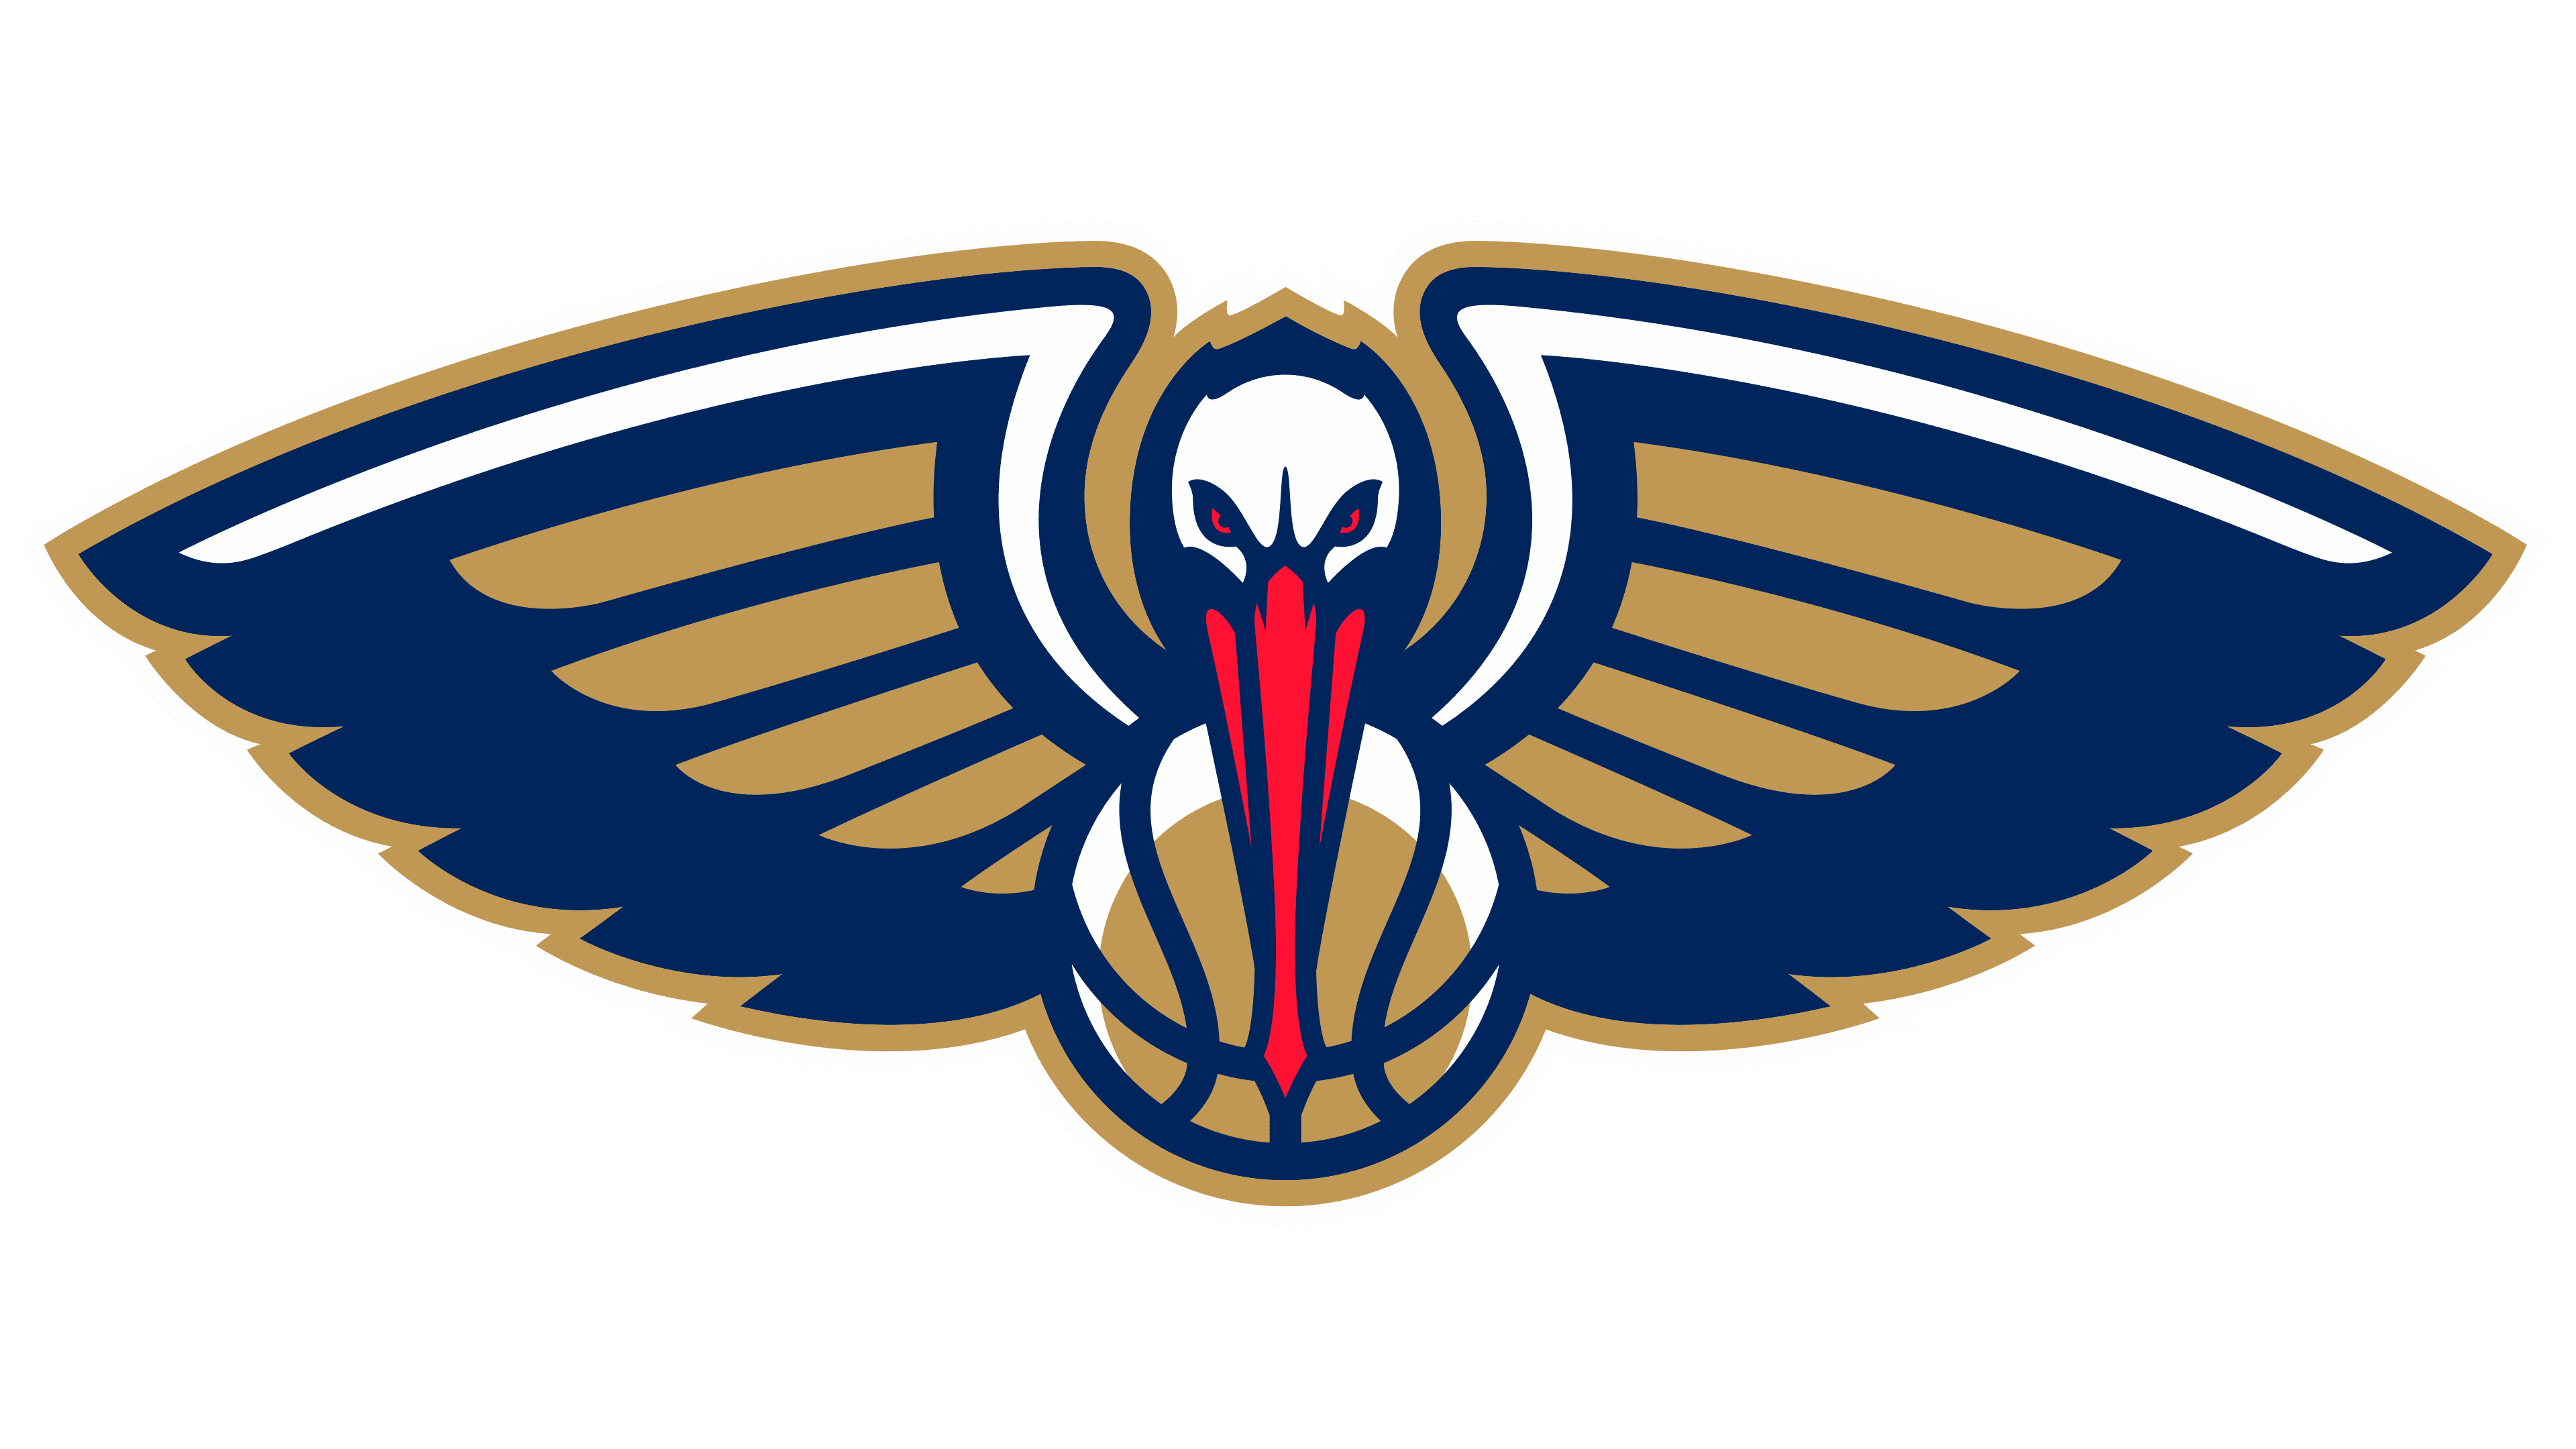 The New Orleans Pelicans logo: Why is that bird so angry? 